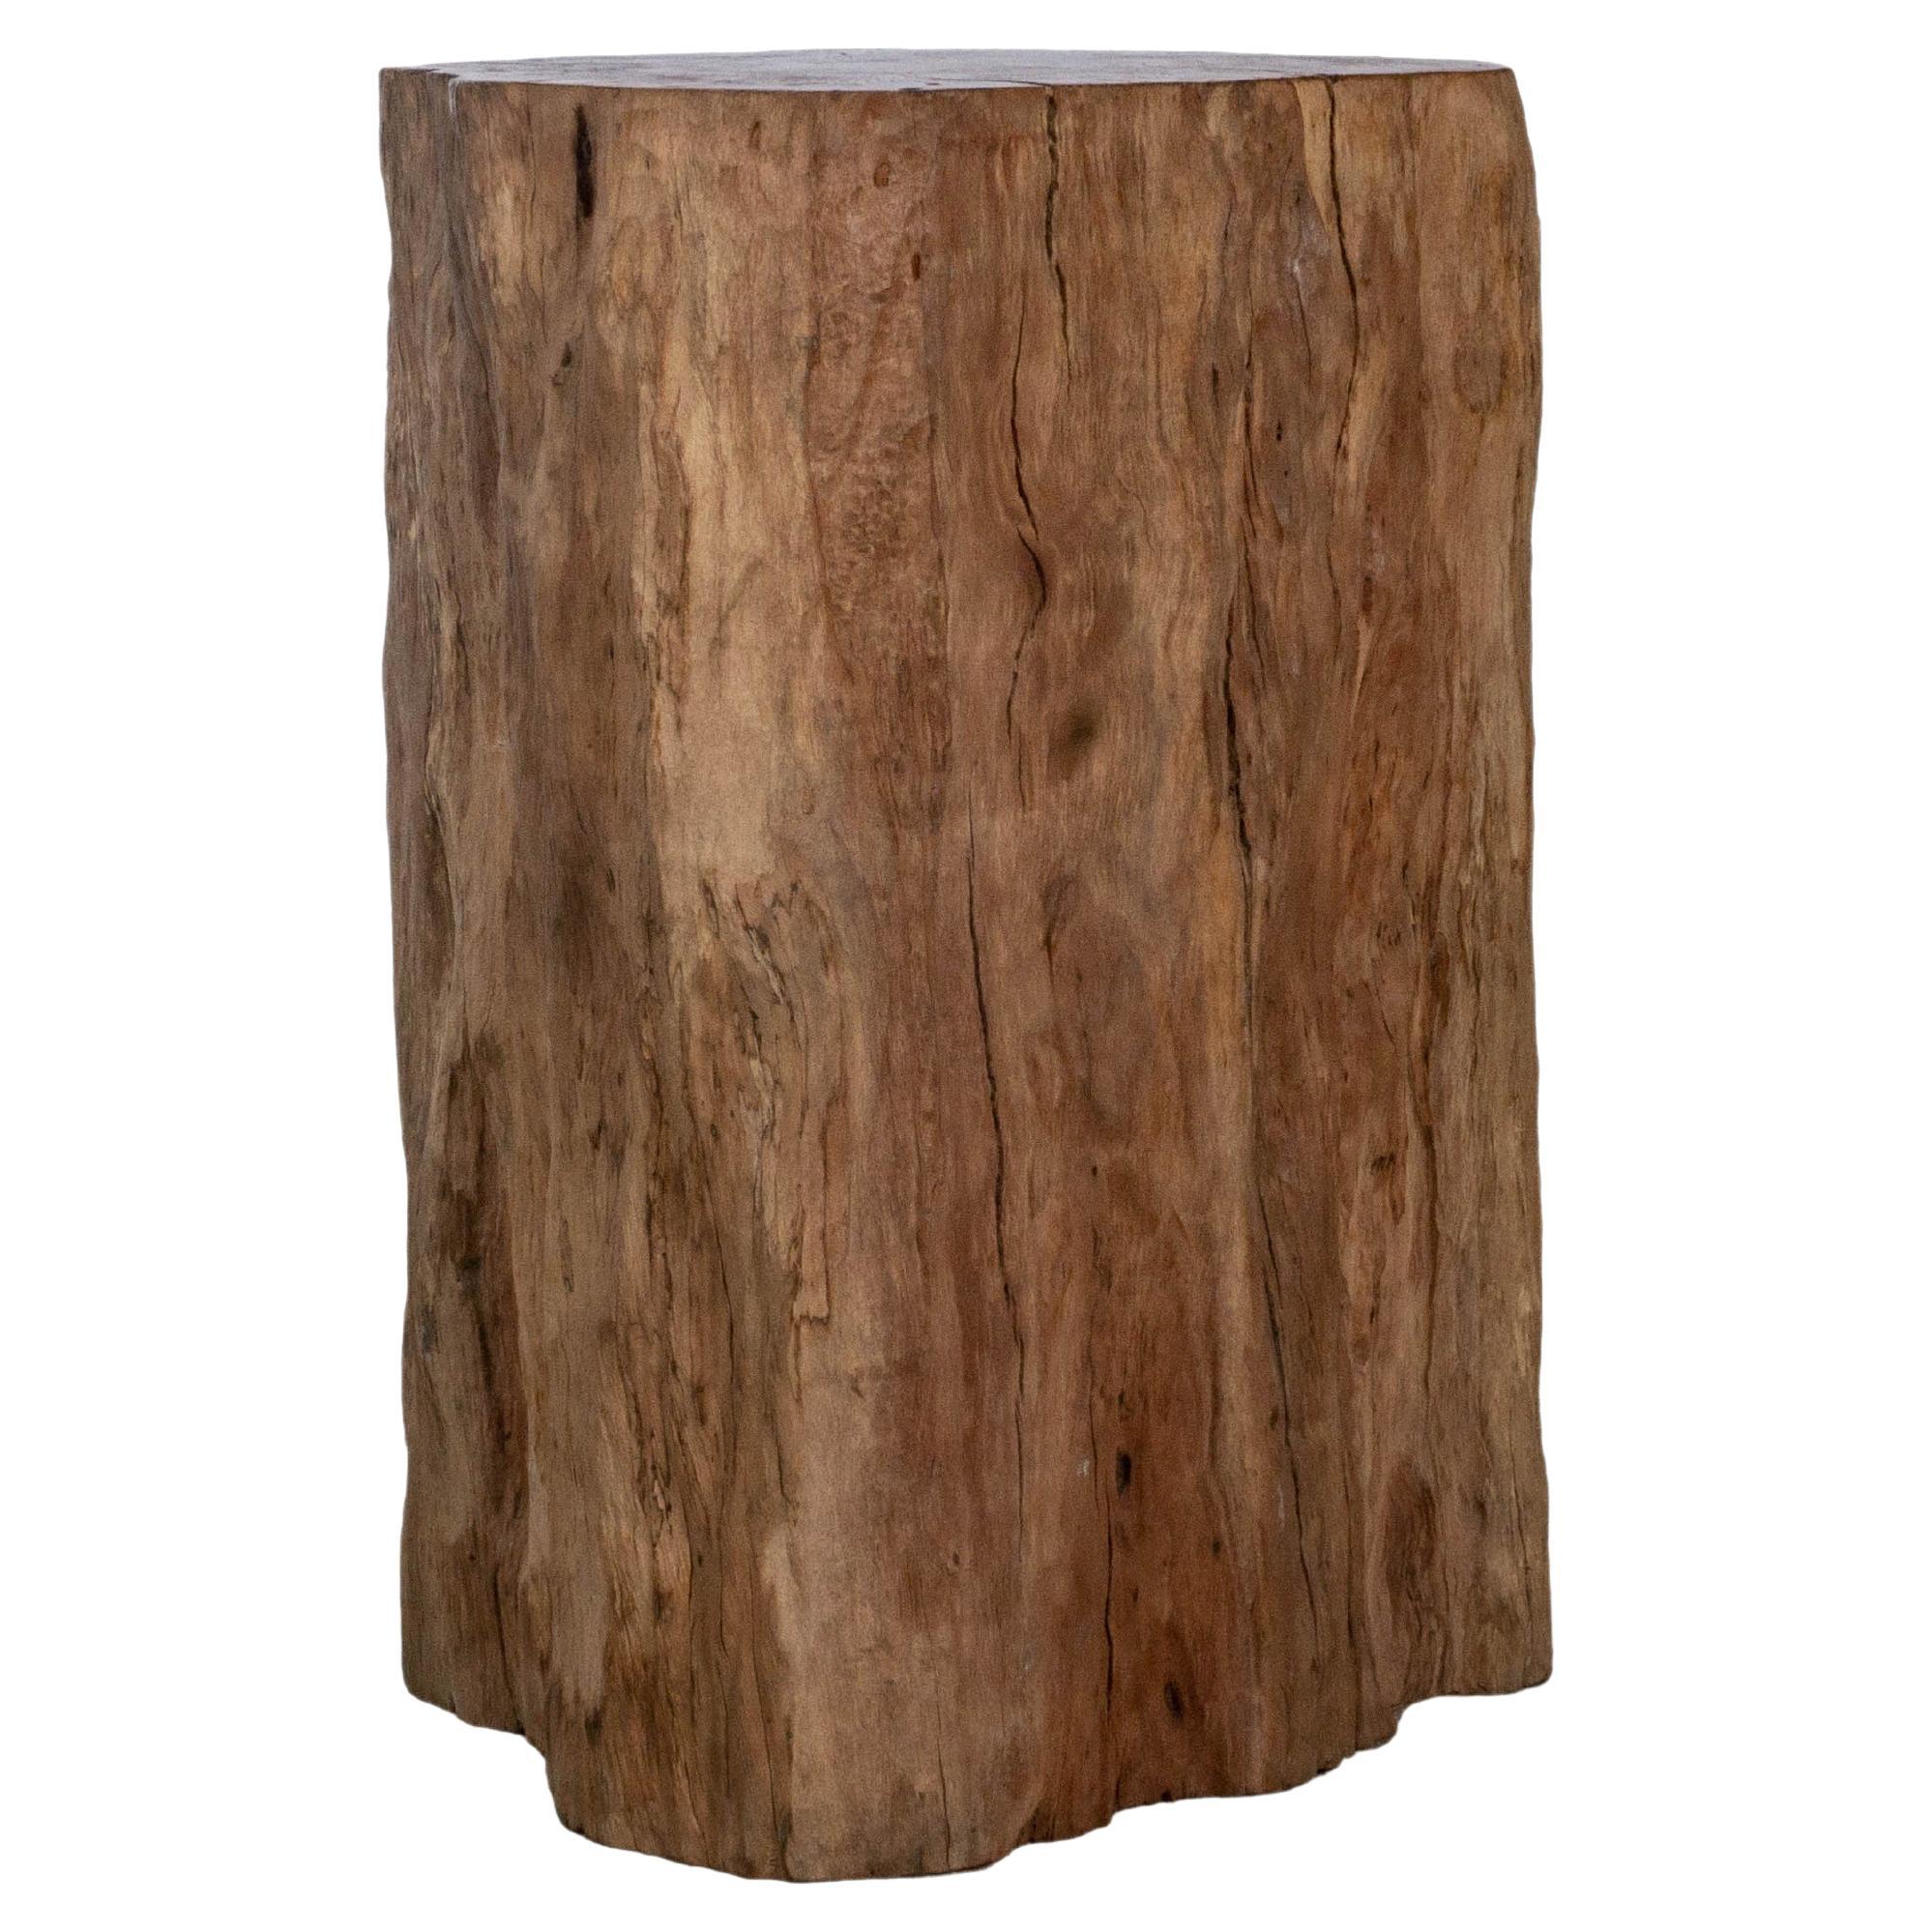 Lychee Wood Organic Form Side Table For Sale